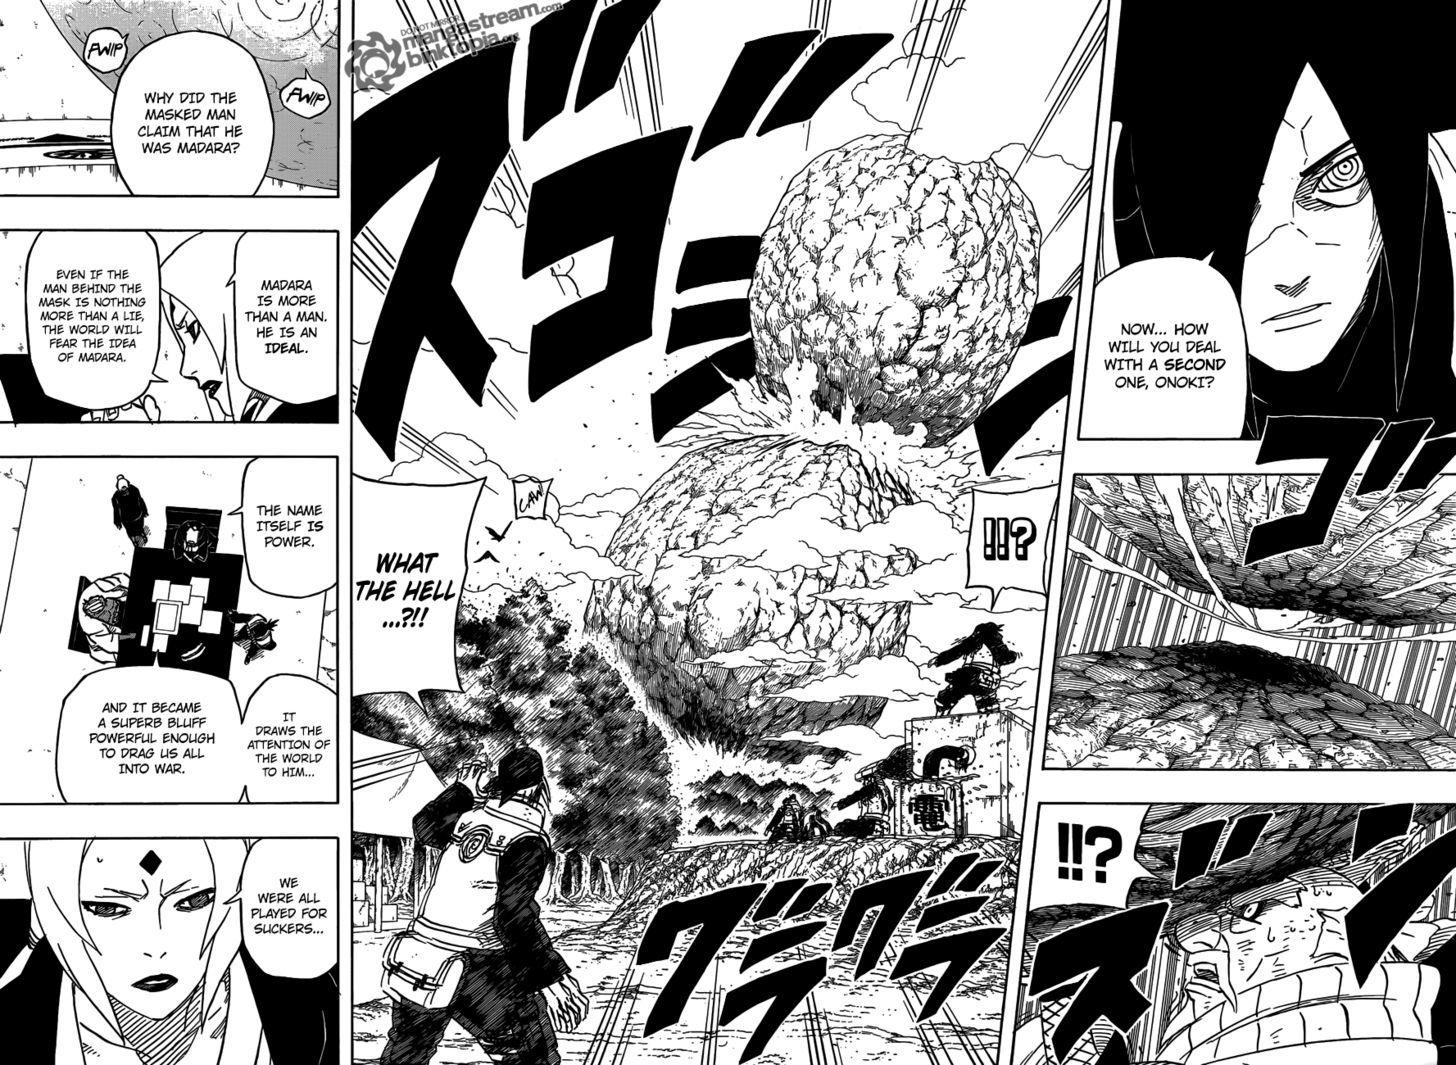 Vol.59 Chapter 561 – The Power of That Name | 4 page